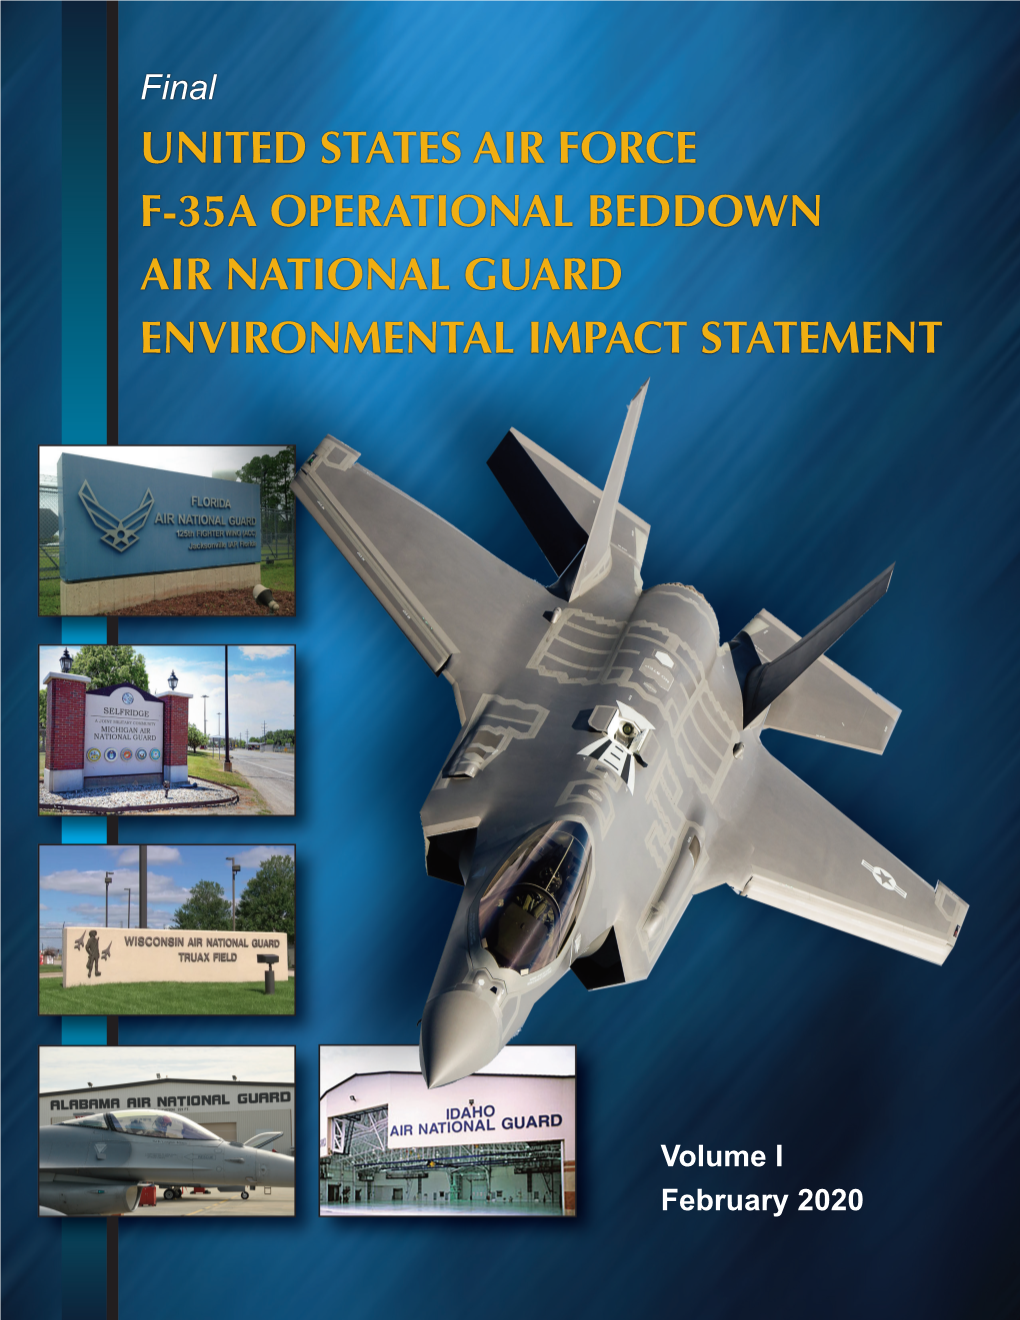 Final UNITED STATES AIR FORCE F-35A OPERATIONAL BEDDOWN AIR NATIONAL GUARD ENVIRONMENTAL IMPACT STATEMENT